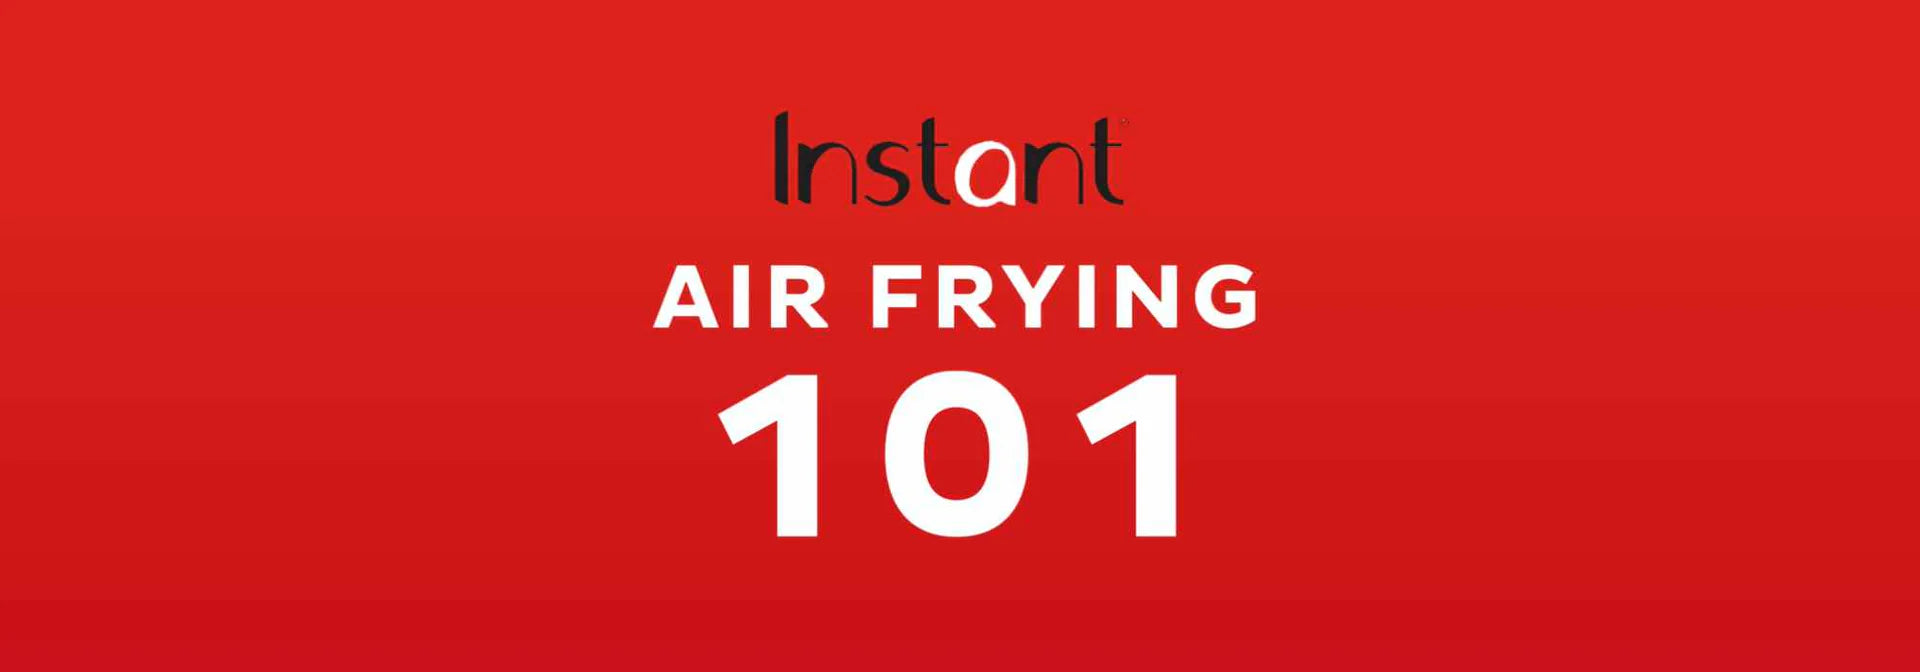 Air frying 101: How to convert oven cooking times to your Air Fryer?